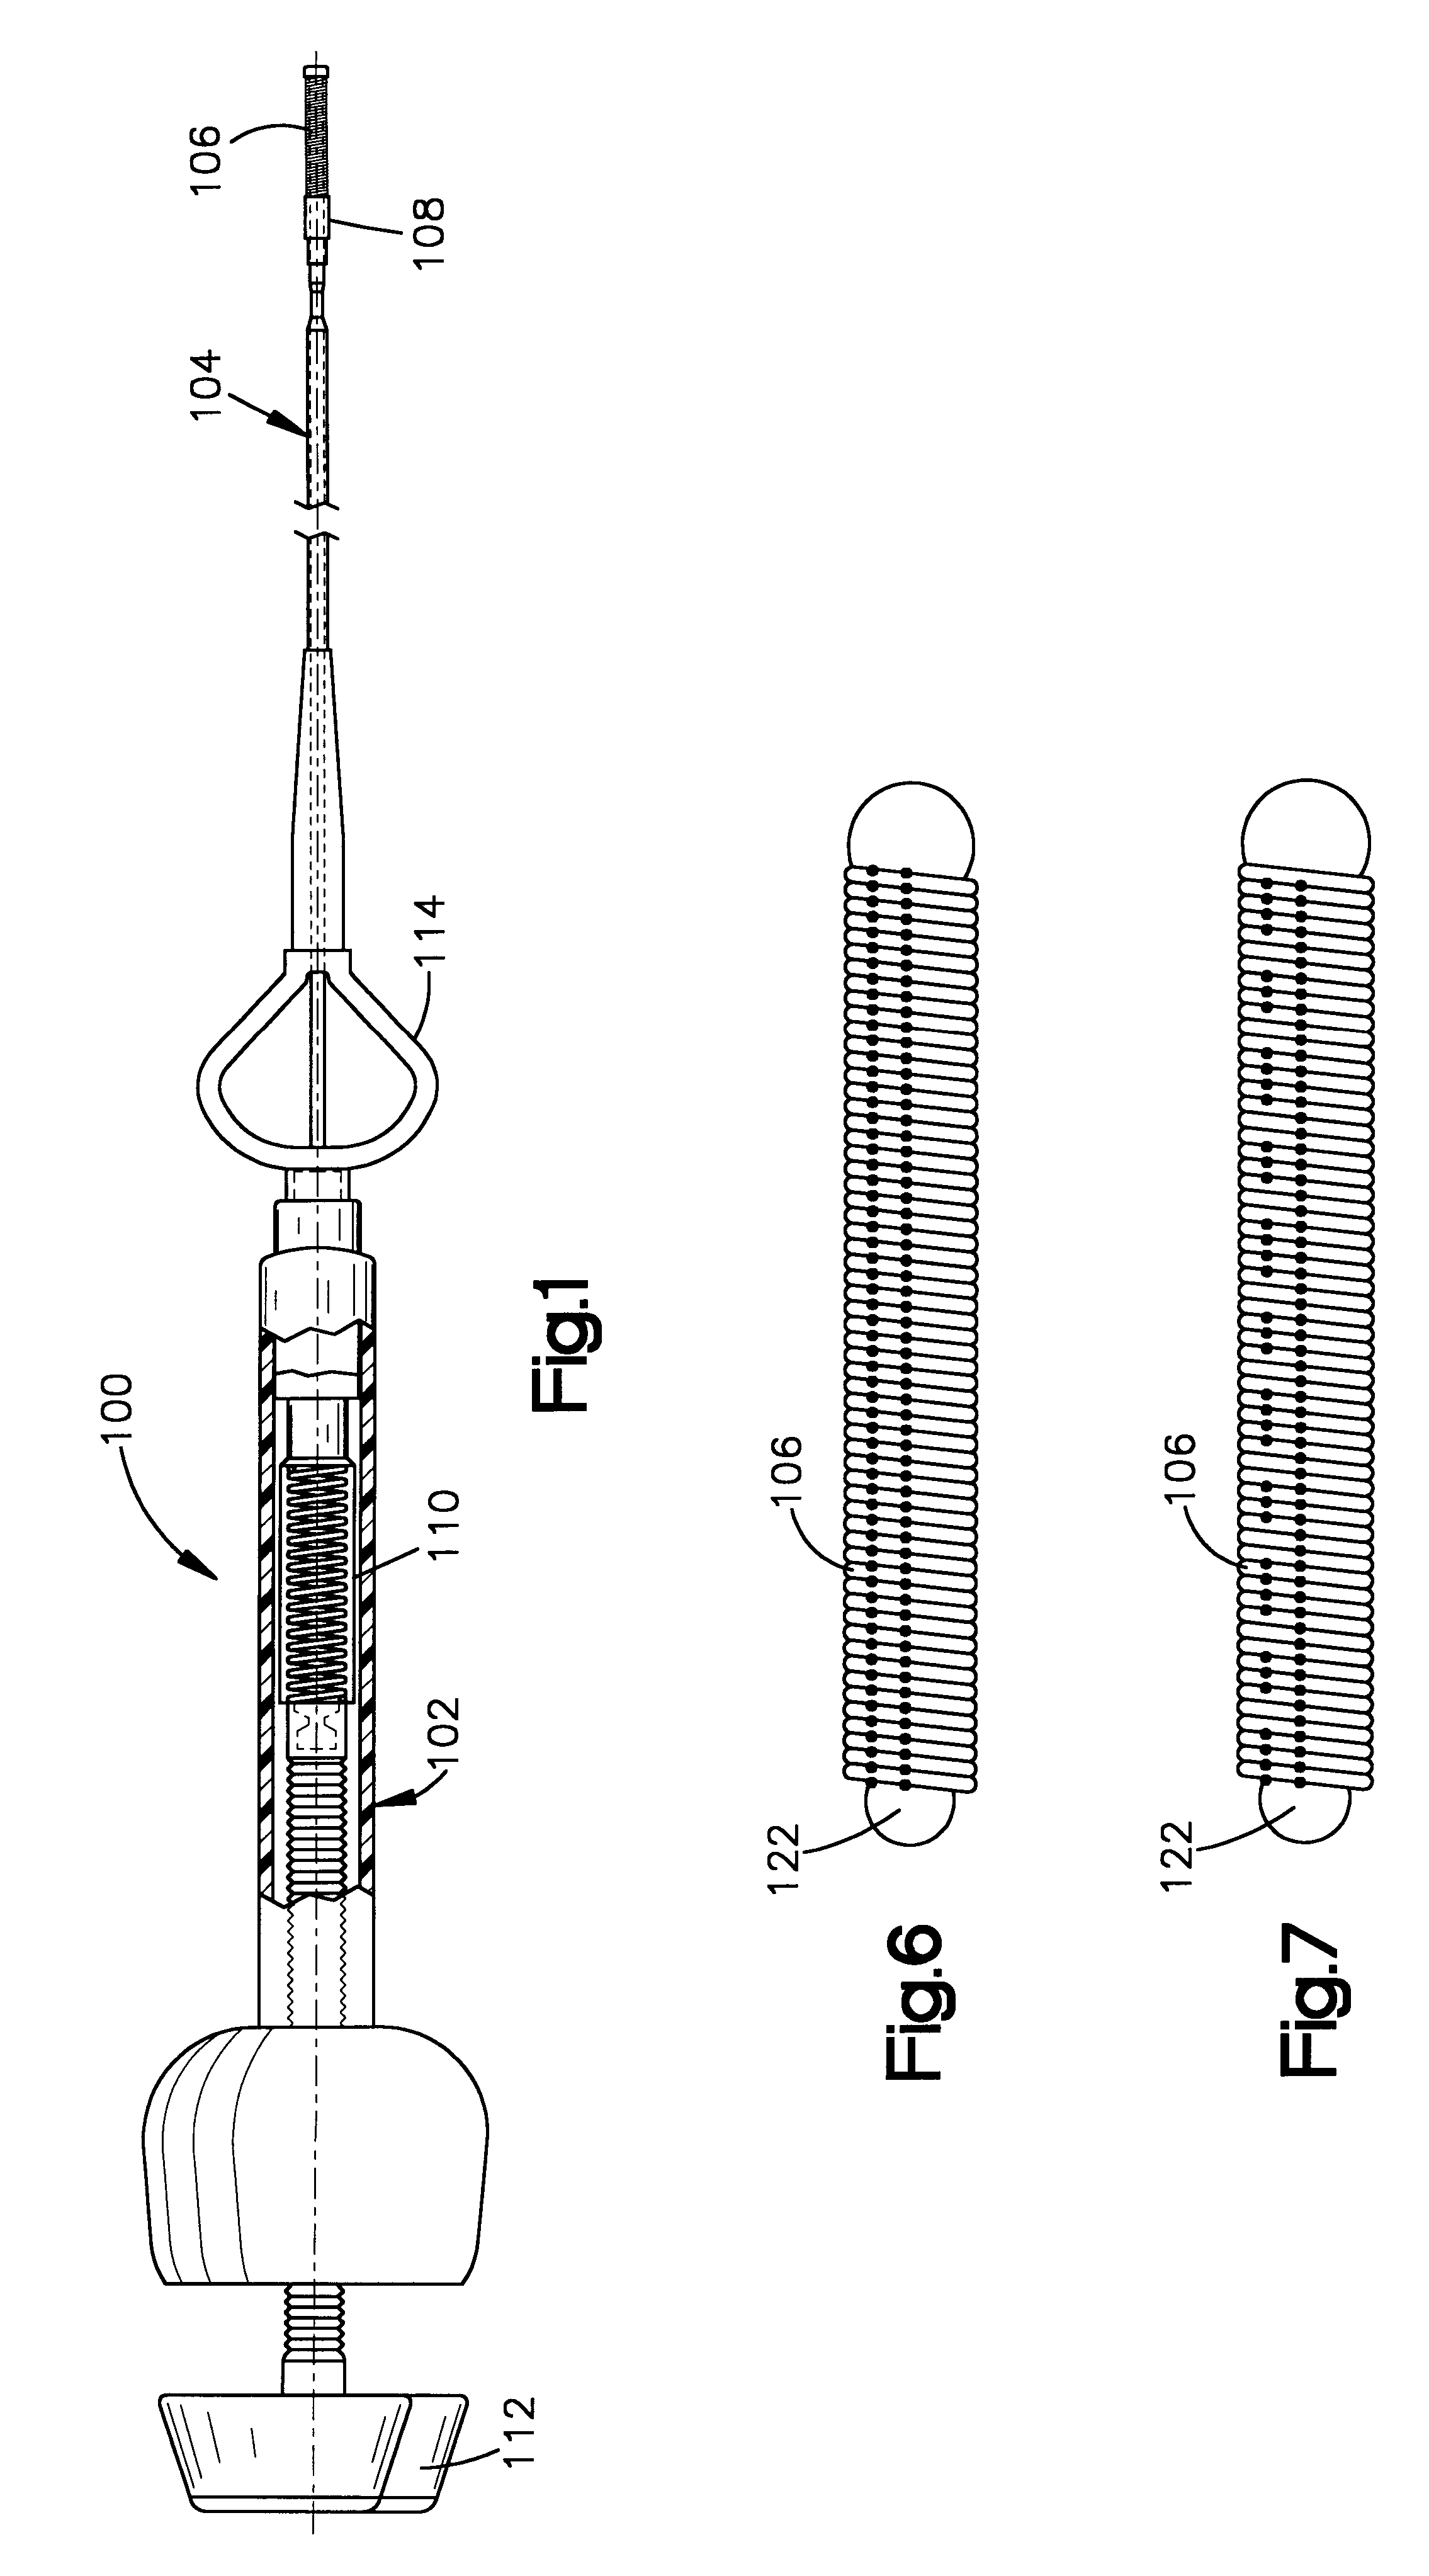 Stretch resistant embolic coil with variable stiffness